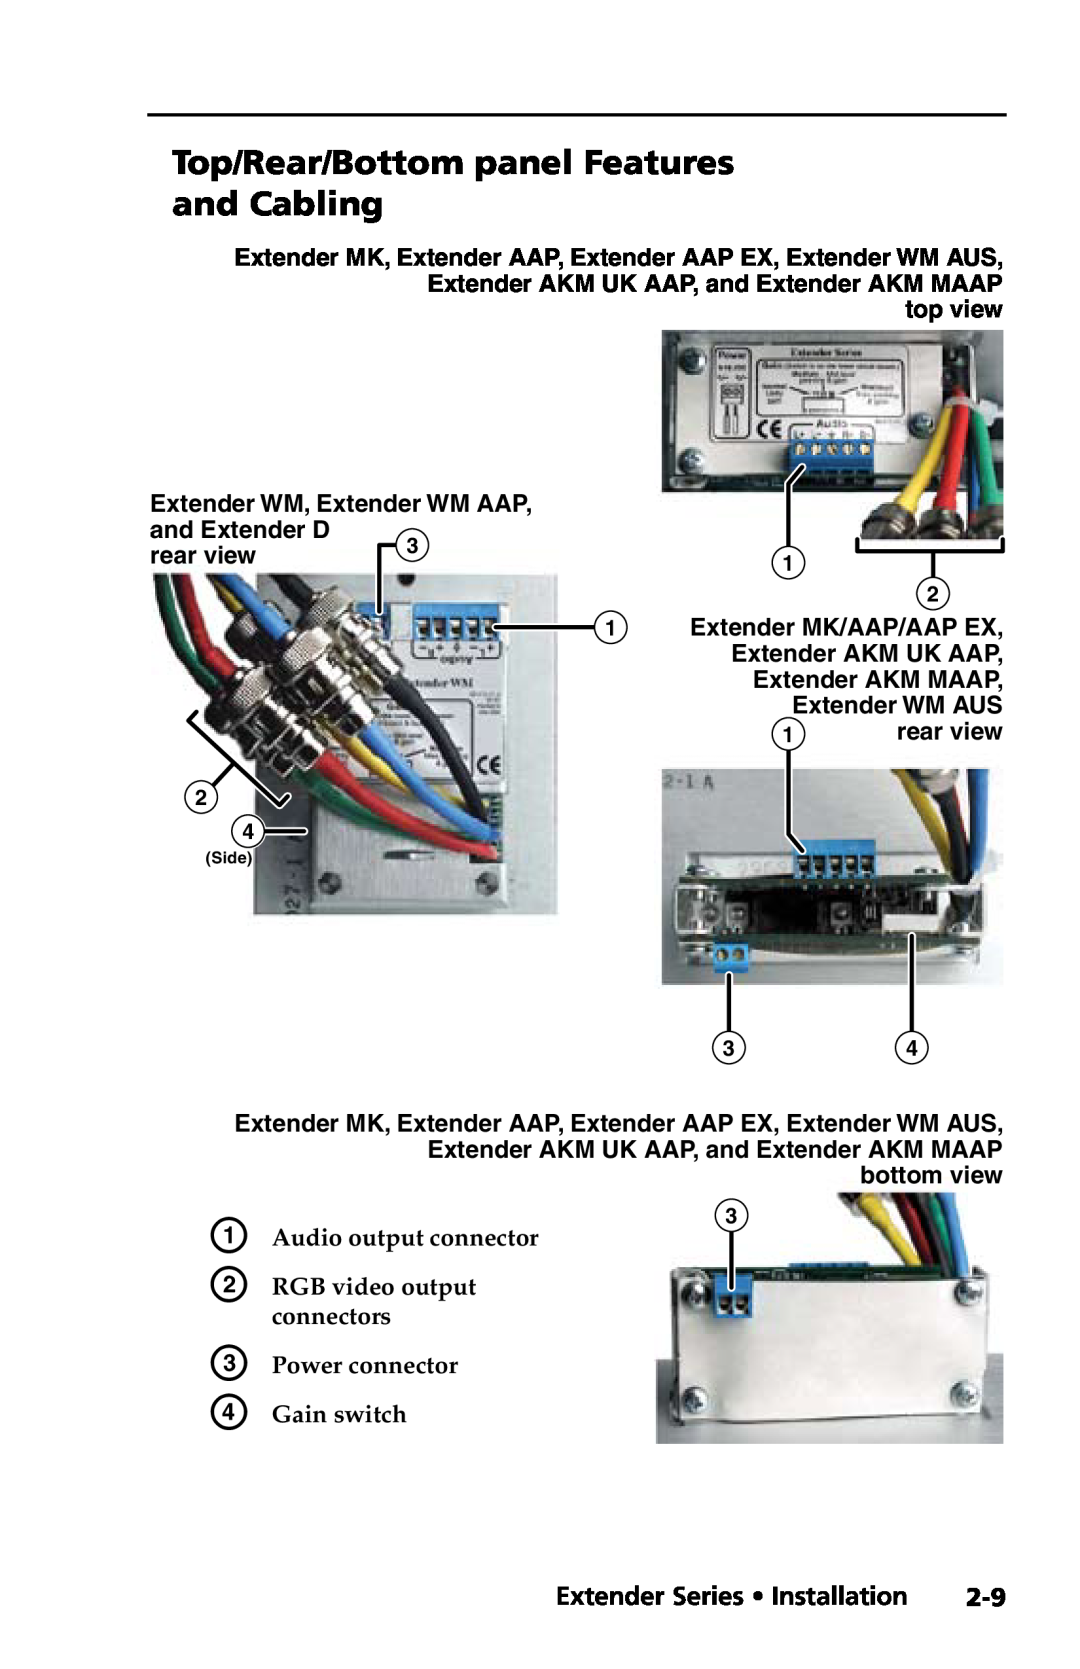 Extron electronic Extender Series manual Top/Rear/Bottom panel Features and Cabling, D Gain switch, Preliminary 